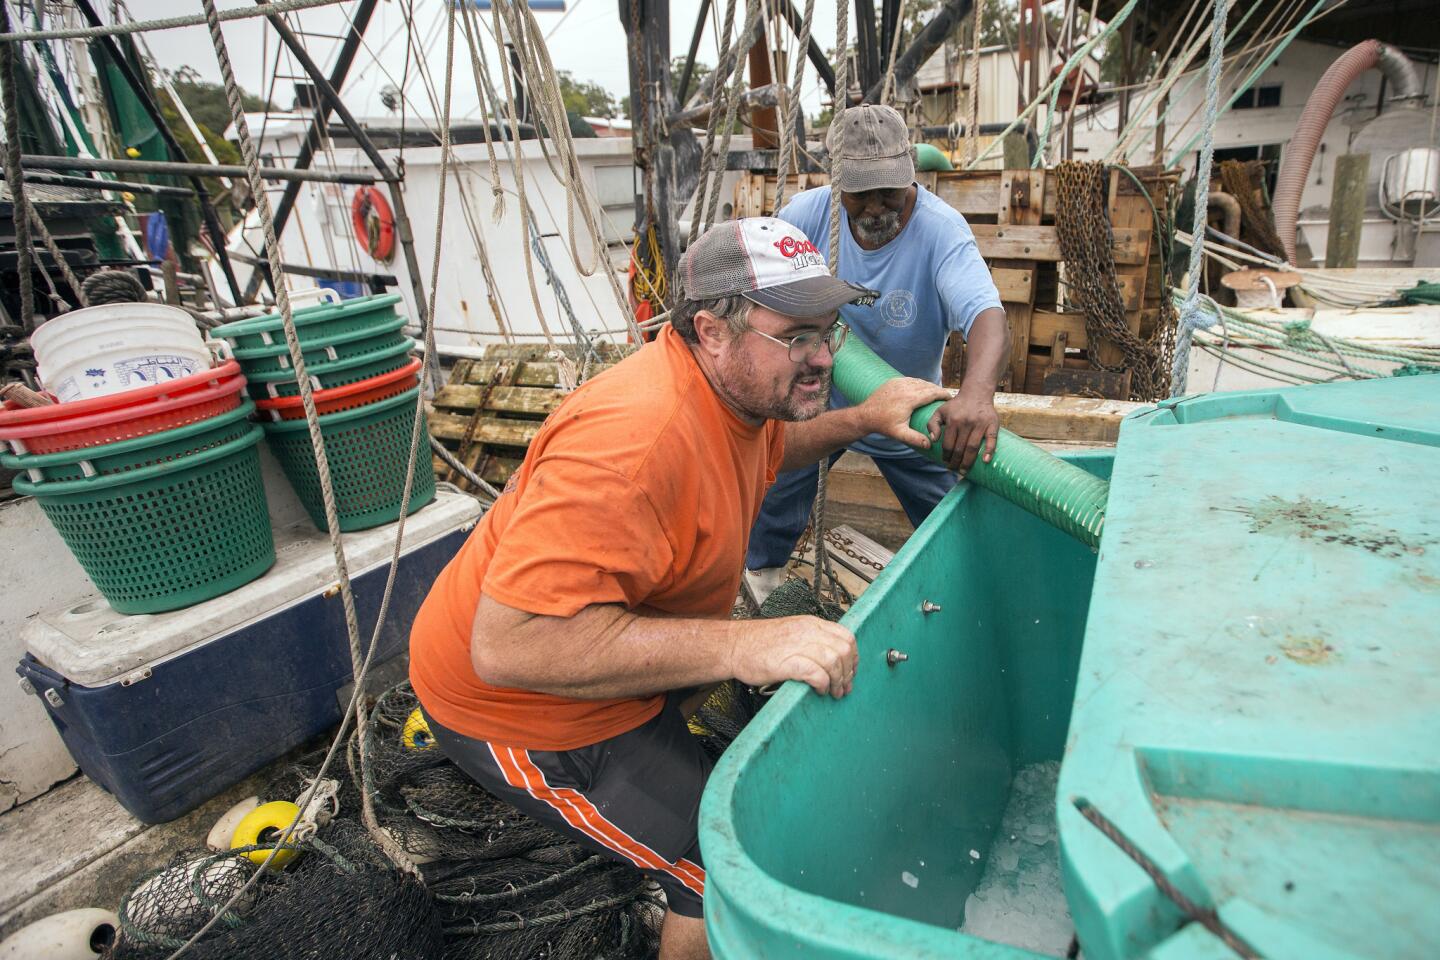 Shrimp boat Captain Wynn Gale, left, and Earnest White, right, fill a ice box with 900 pounds of ice during storm preparations for Hurricane Matthew, Thursday, Oct. 6, 2016, in Darien, Ga. Hurricane Matthew steamed toward Florida with terrifying winds of 140 mph Thursday, and 2 million people across the Southeast were warned to flee inland. (AP Photo/Stephen B. Morton)